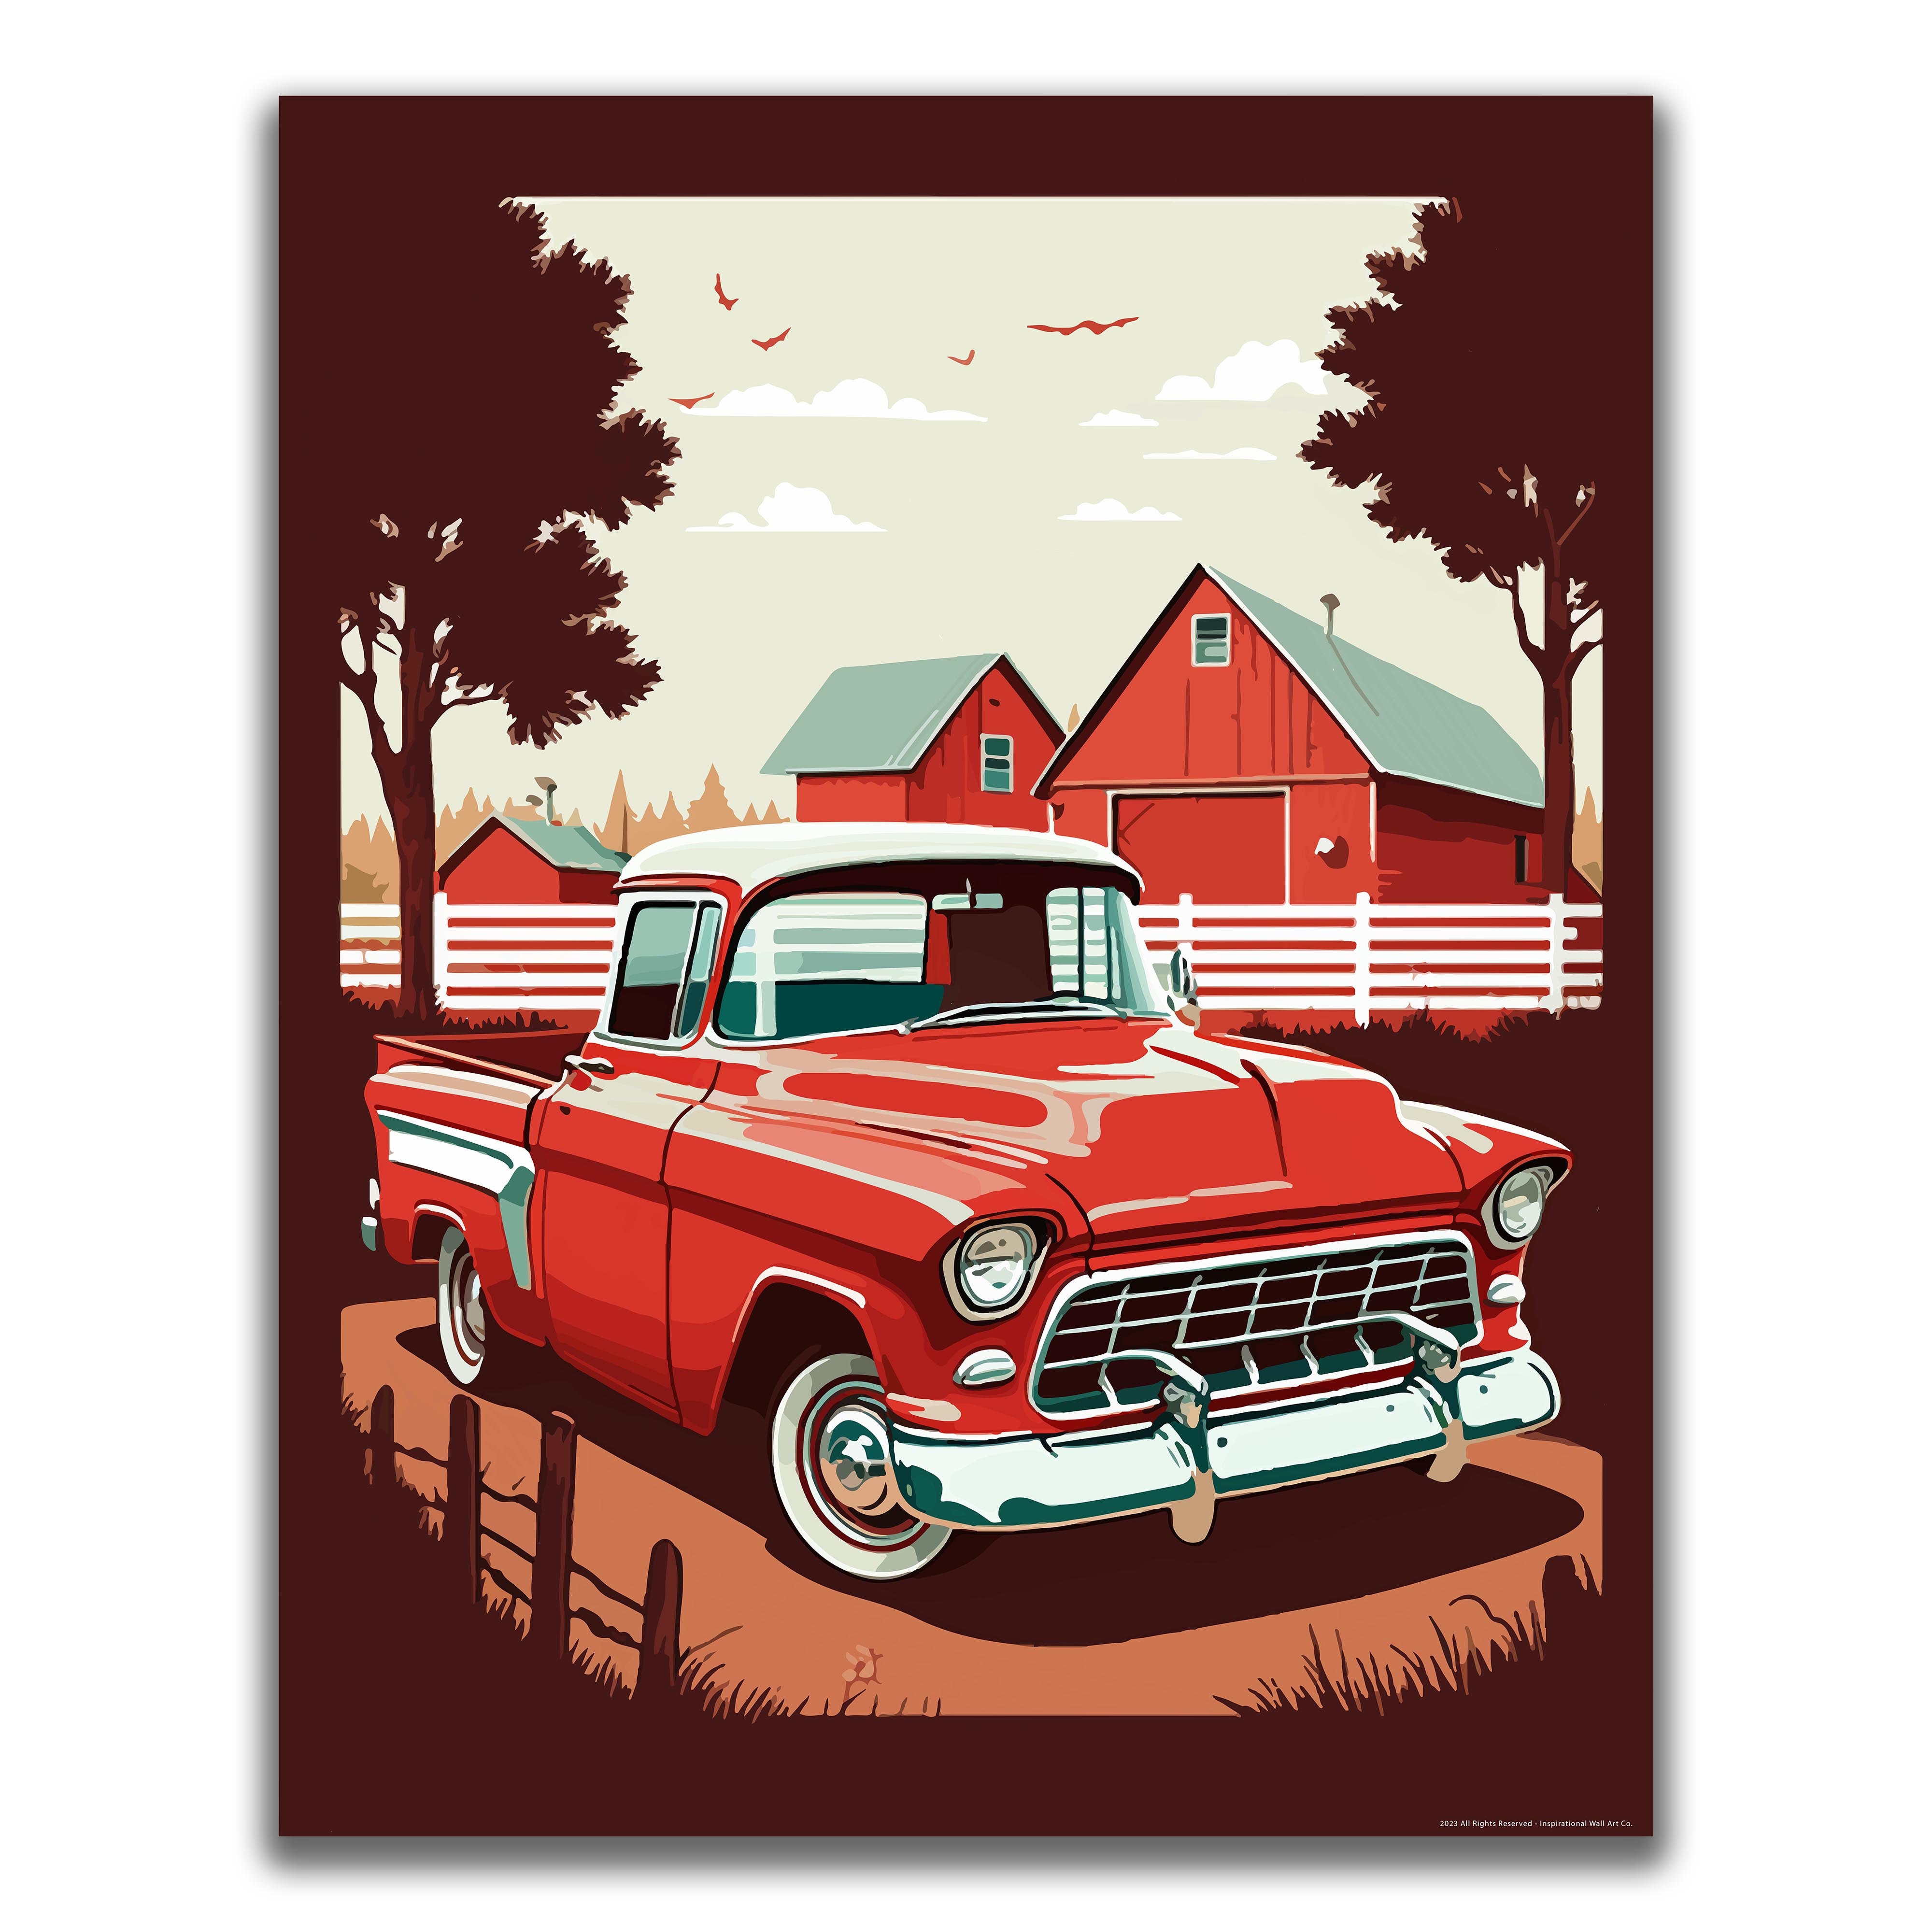 Clear Skies - Truck Poster